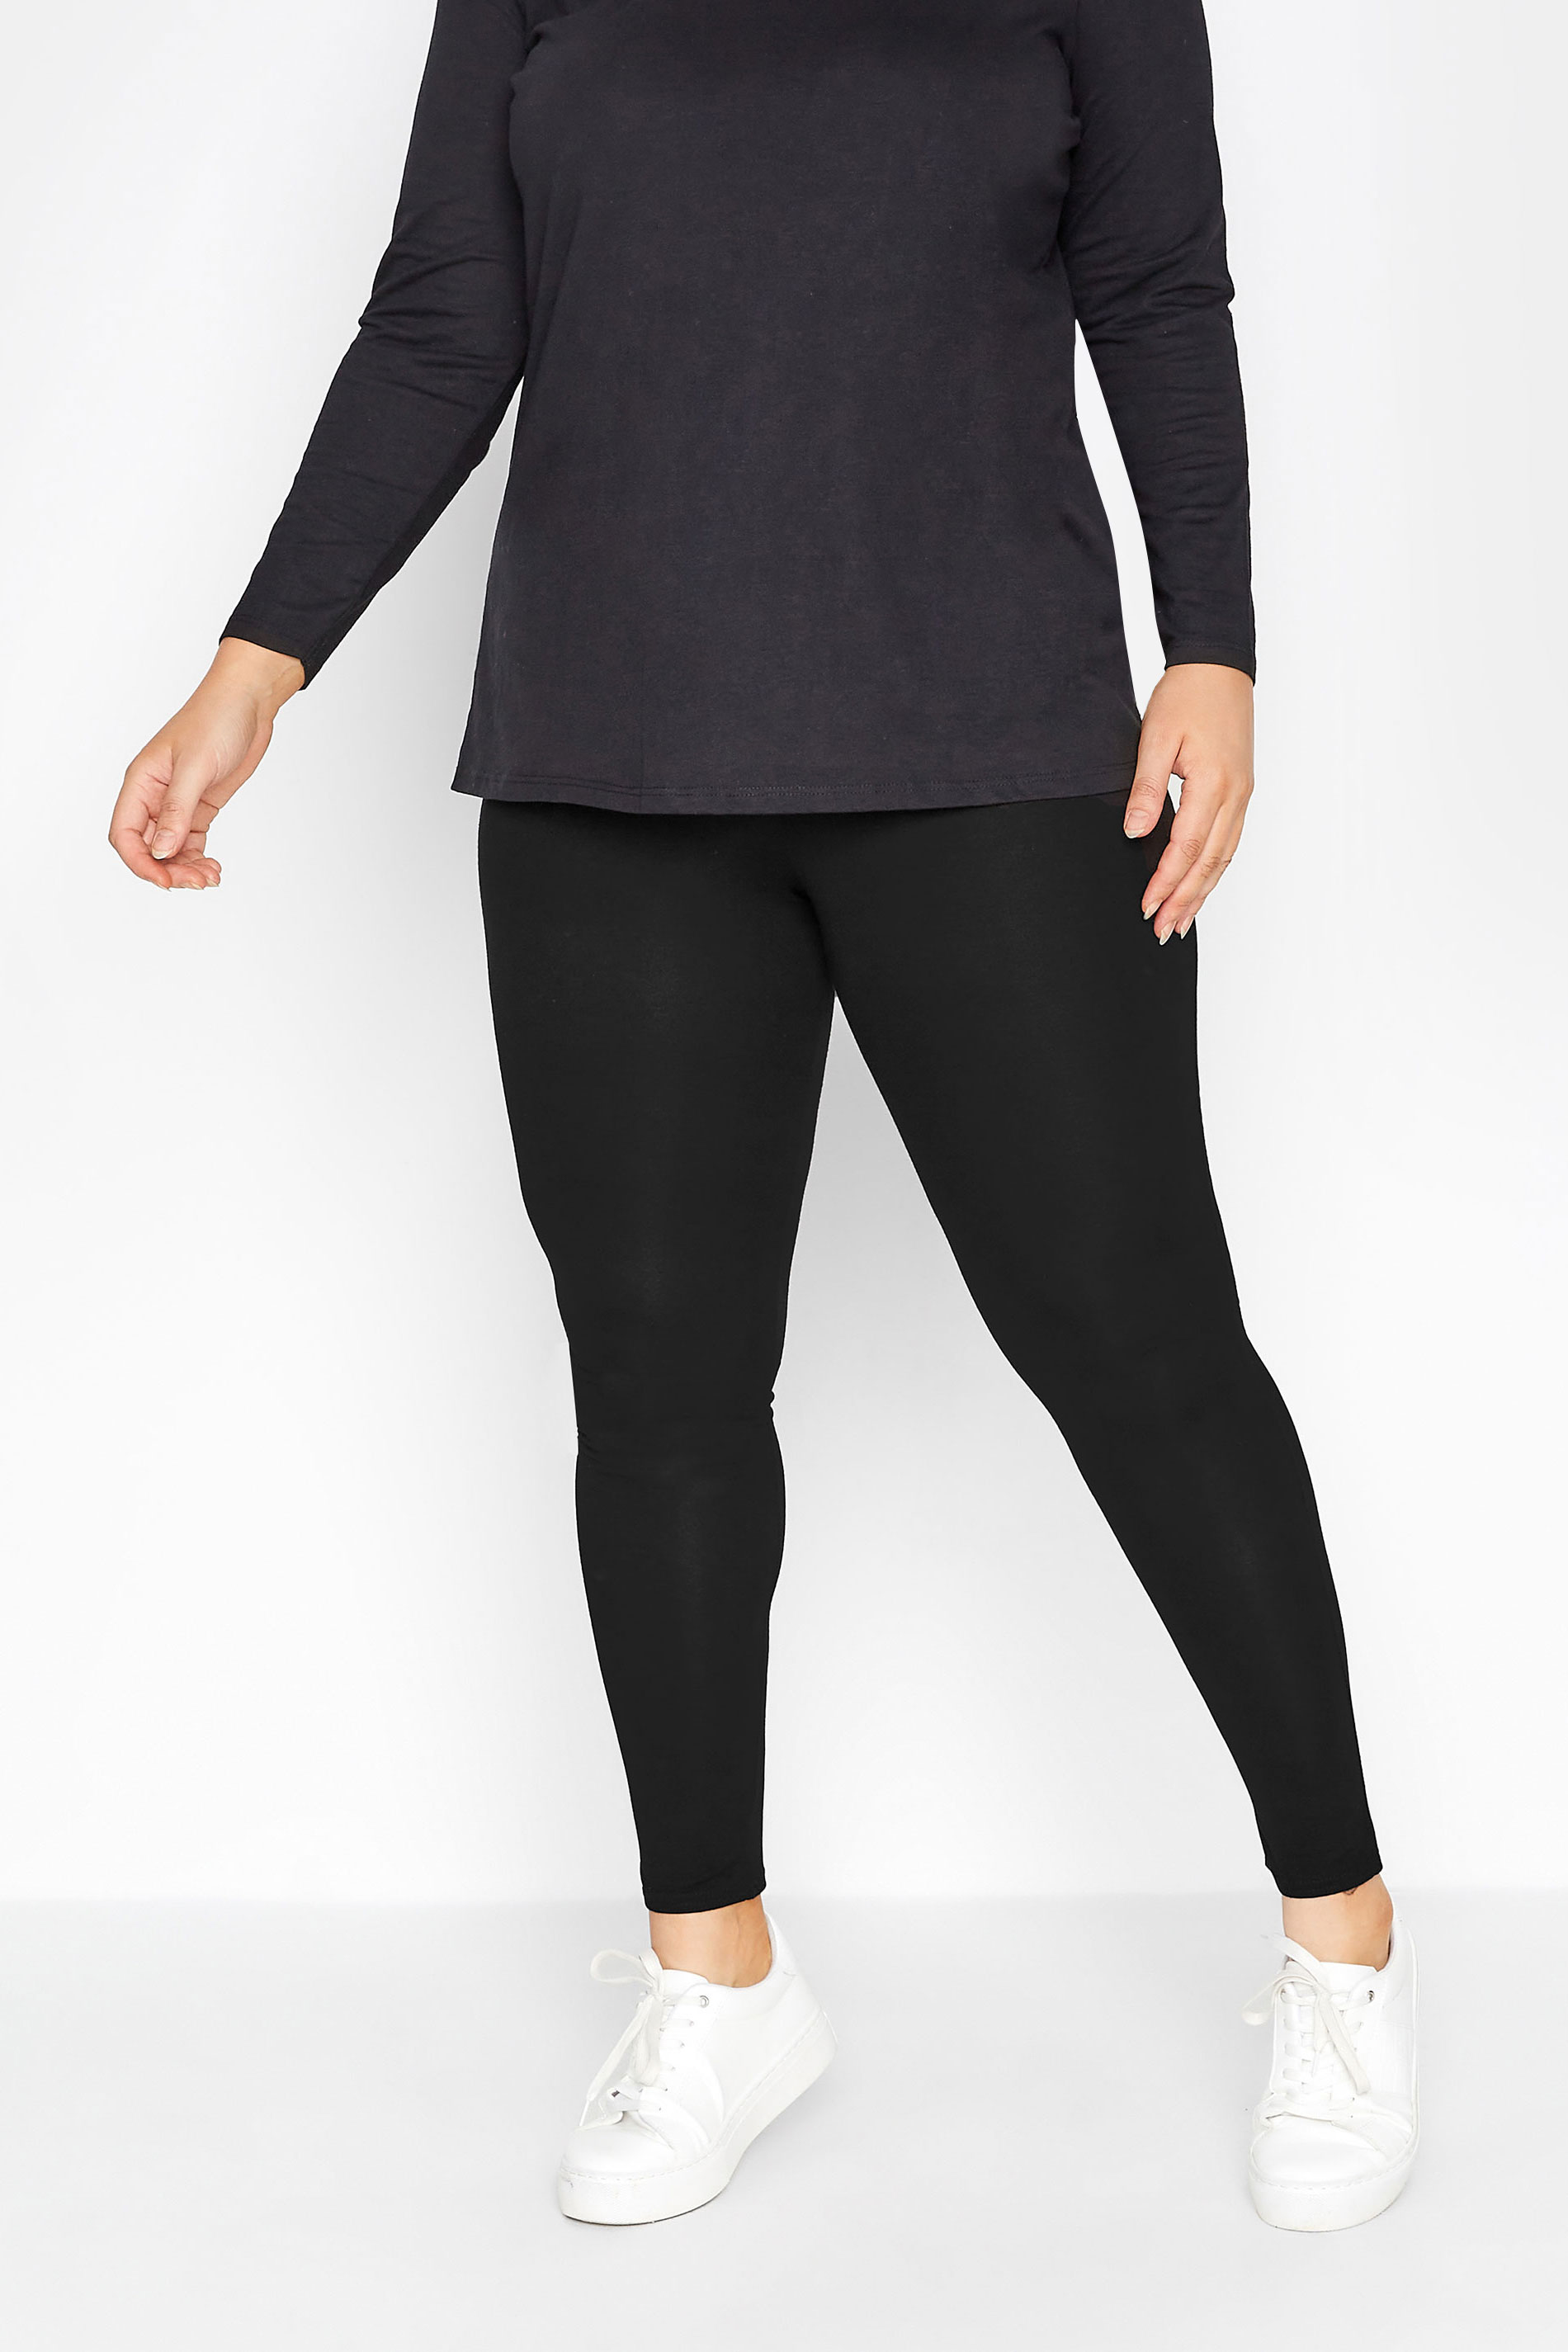 Plus Size Black Soft Touch Stretch Leggings | Yours Clothing 1